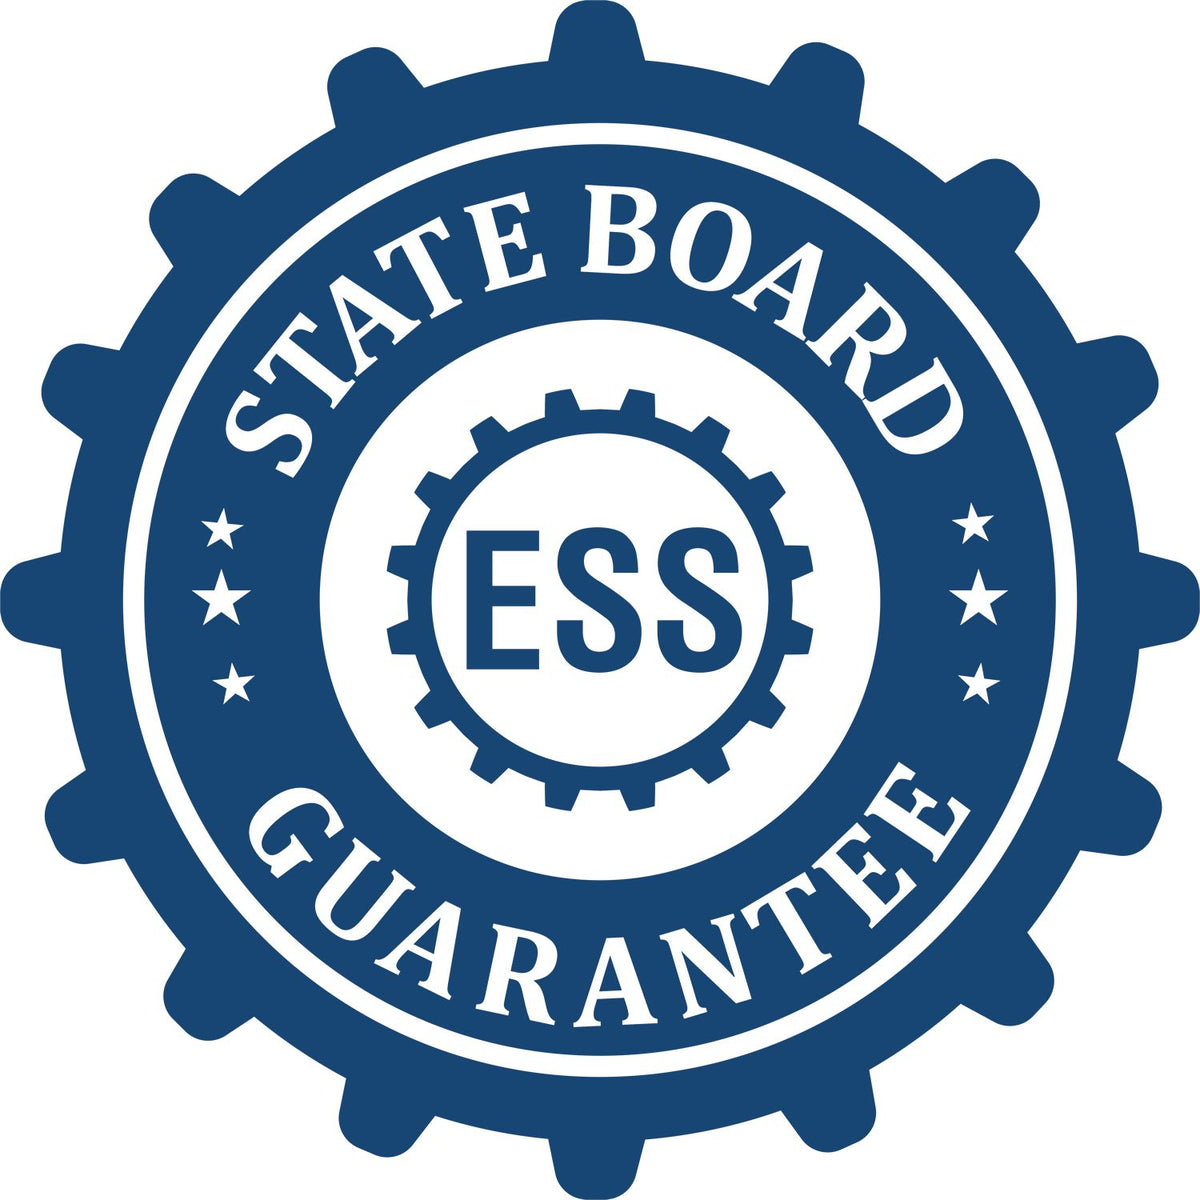 An emblem in a gear shape illustrating a state board guarantee for the Heavy-Duty Pennsylvania Rectangular Notary Stamp product.